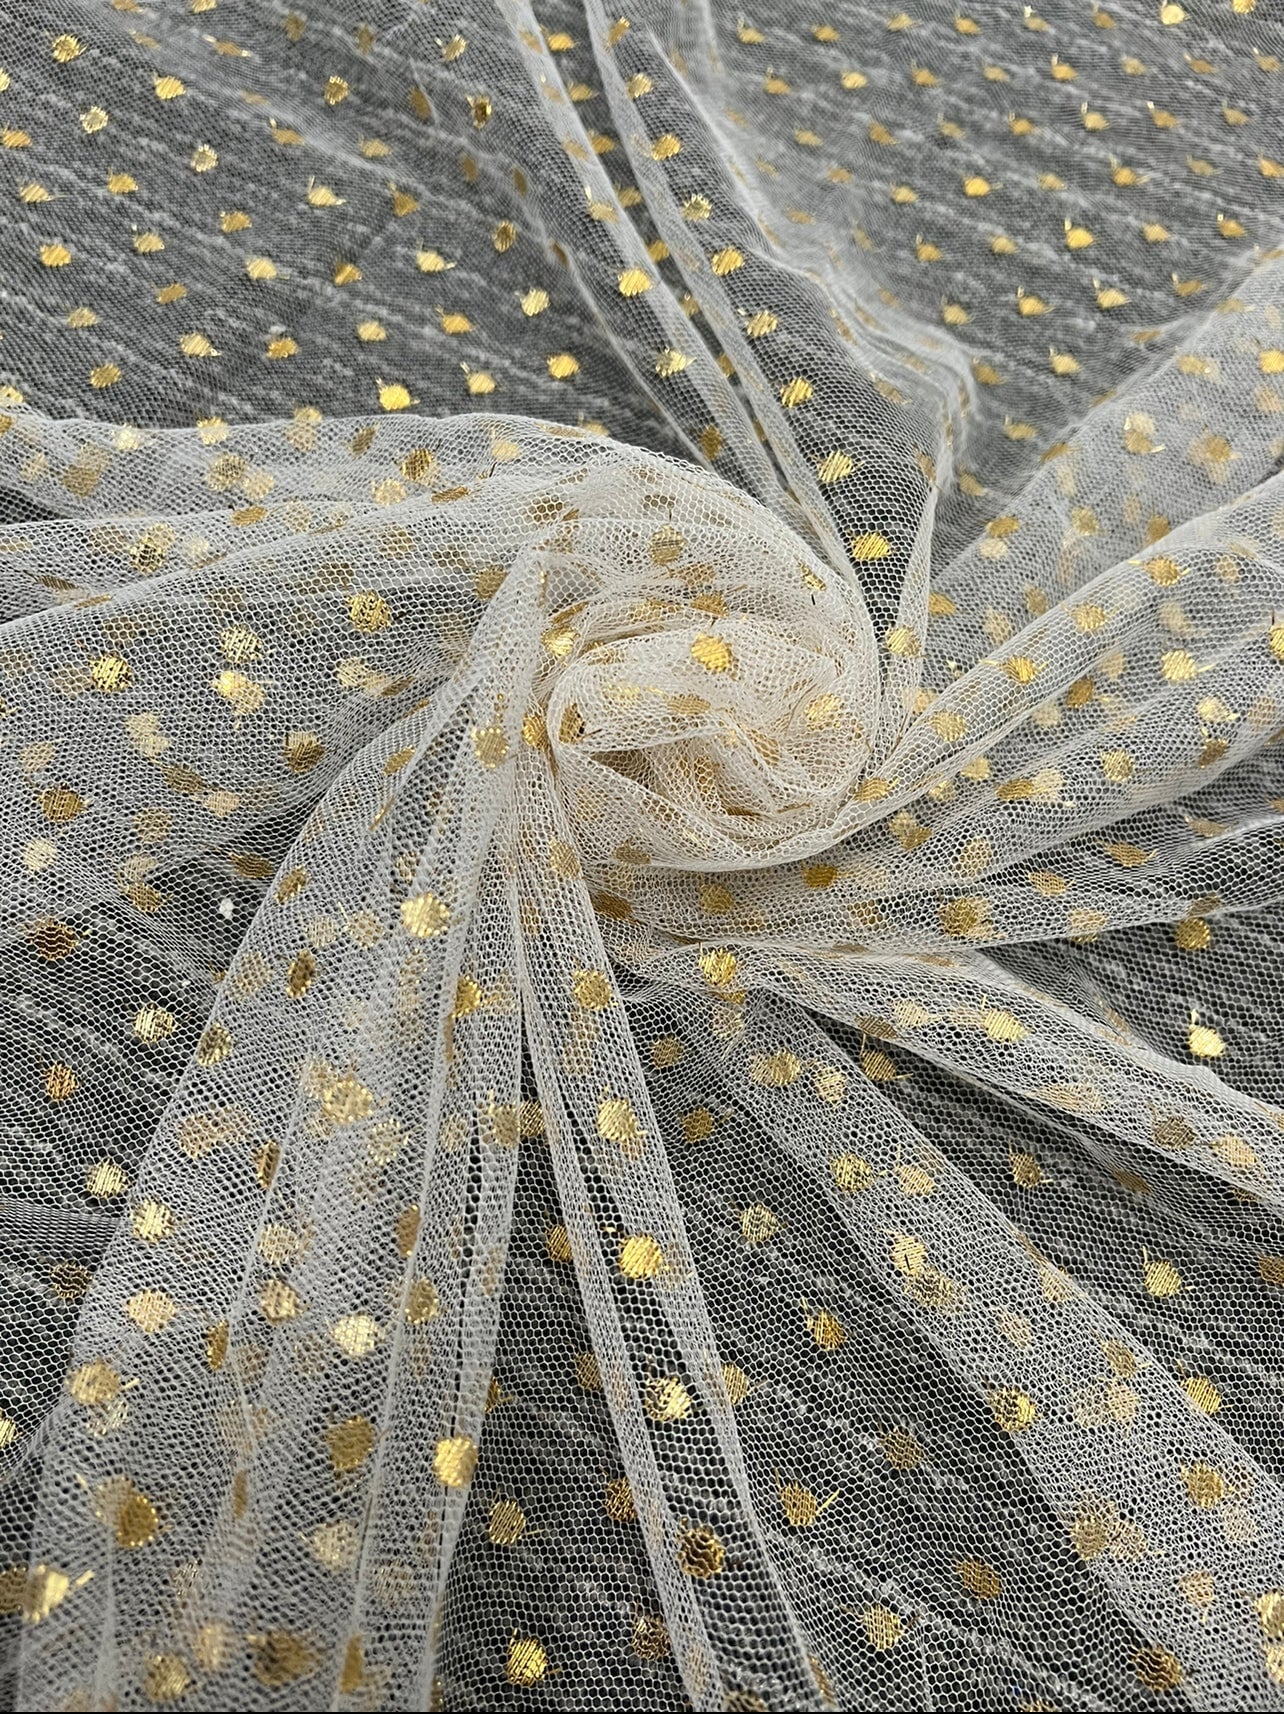 Gold Embroidery Polka Dot Tulle, dusty gold Embroidery Polka Dot Tulle, white tulle fabric, Embroidery Polka Dot Tulle for woman, Embroidery Polka Dot Tulle for party wear, premium Embroidery Polka Dot Tulle, buy Embroidery Polka Dot Tulle online, cheap Embroidery Polka Dot Tulle, Embroidery Polka Dot Tulle in low price, Embroidery Polka Dot Tulle on discount 